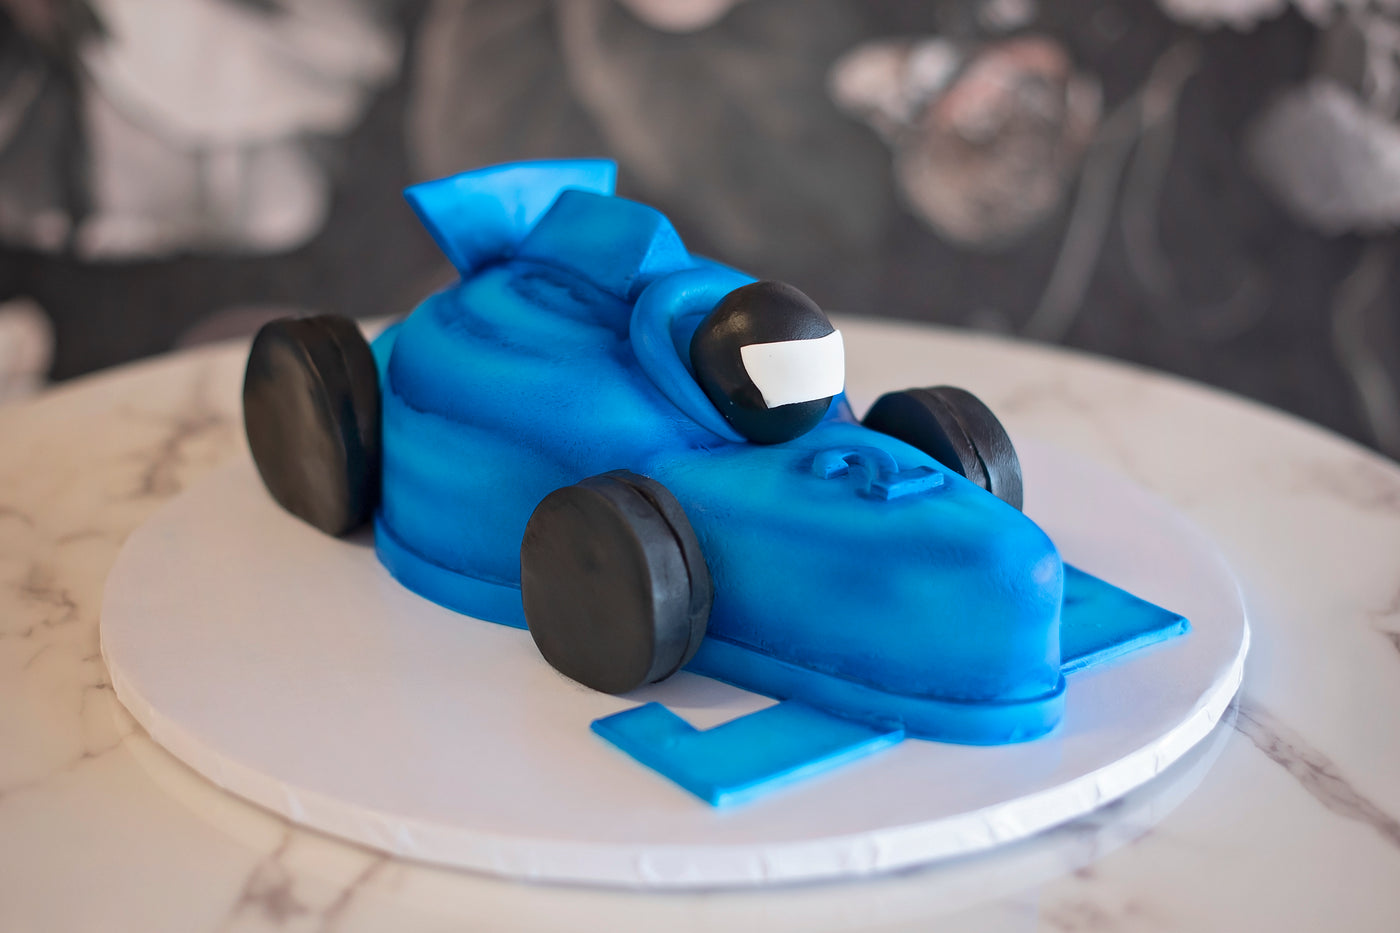 Every kid should have a car themed birthday party! This is the best cake for your kiddo that's growing up "2 fast." Ready your helmets, motor oil and hub caps. This cake is about to rock that Formula 1 party! 